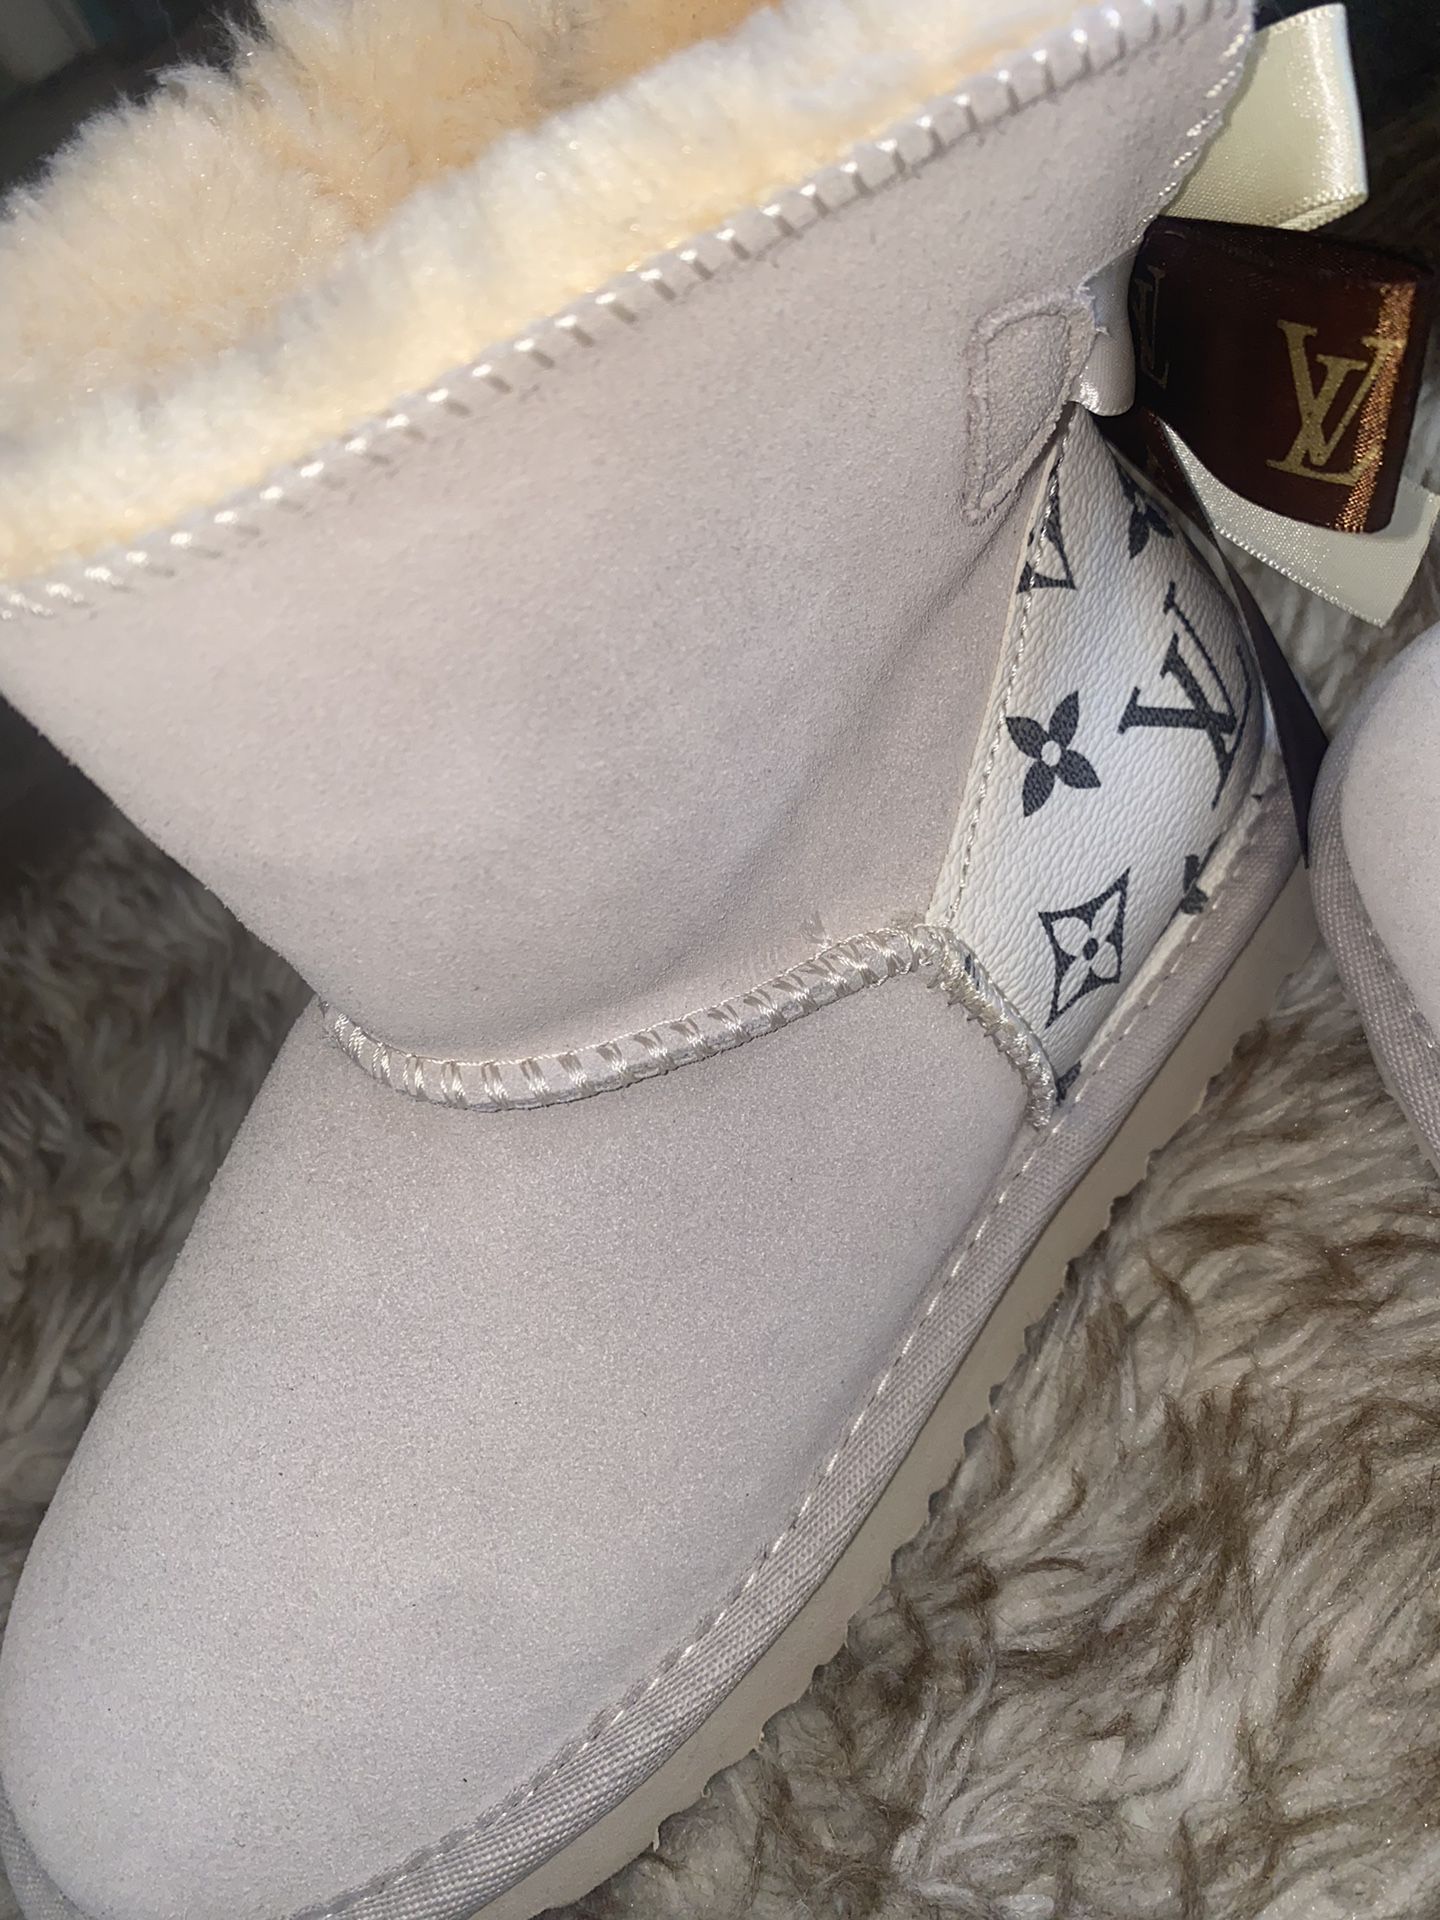 New Uggs Size 7